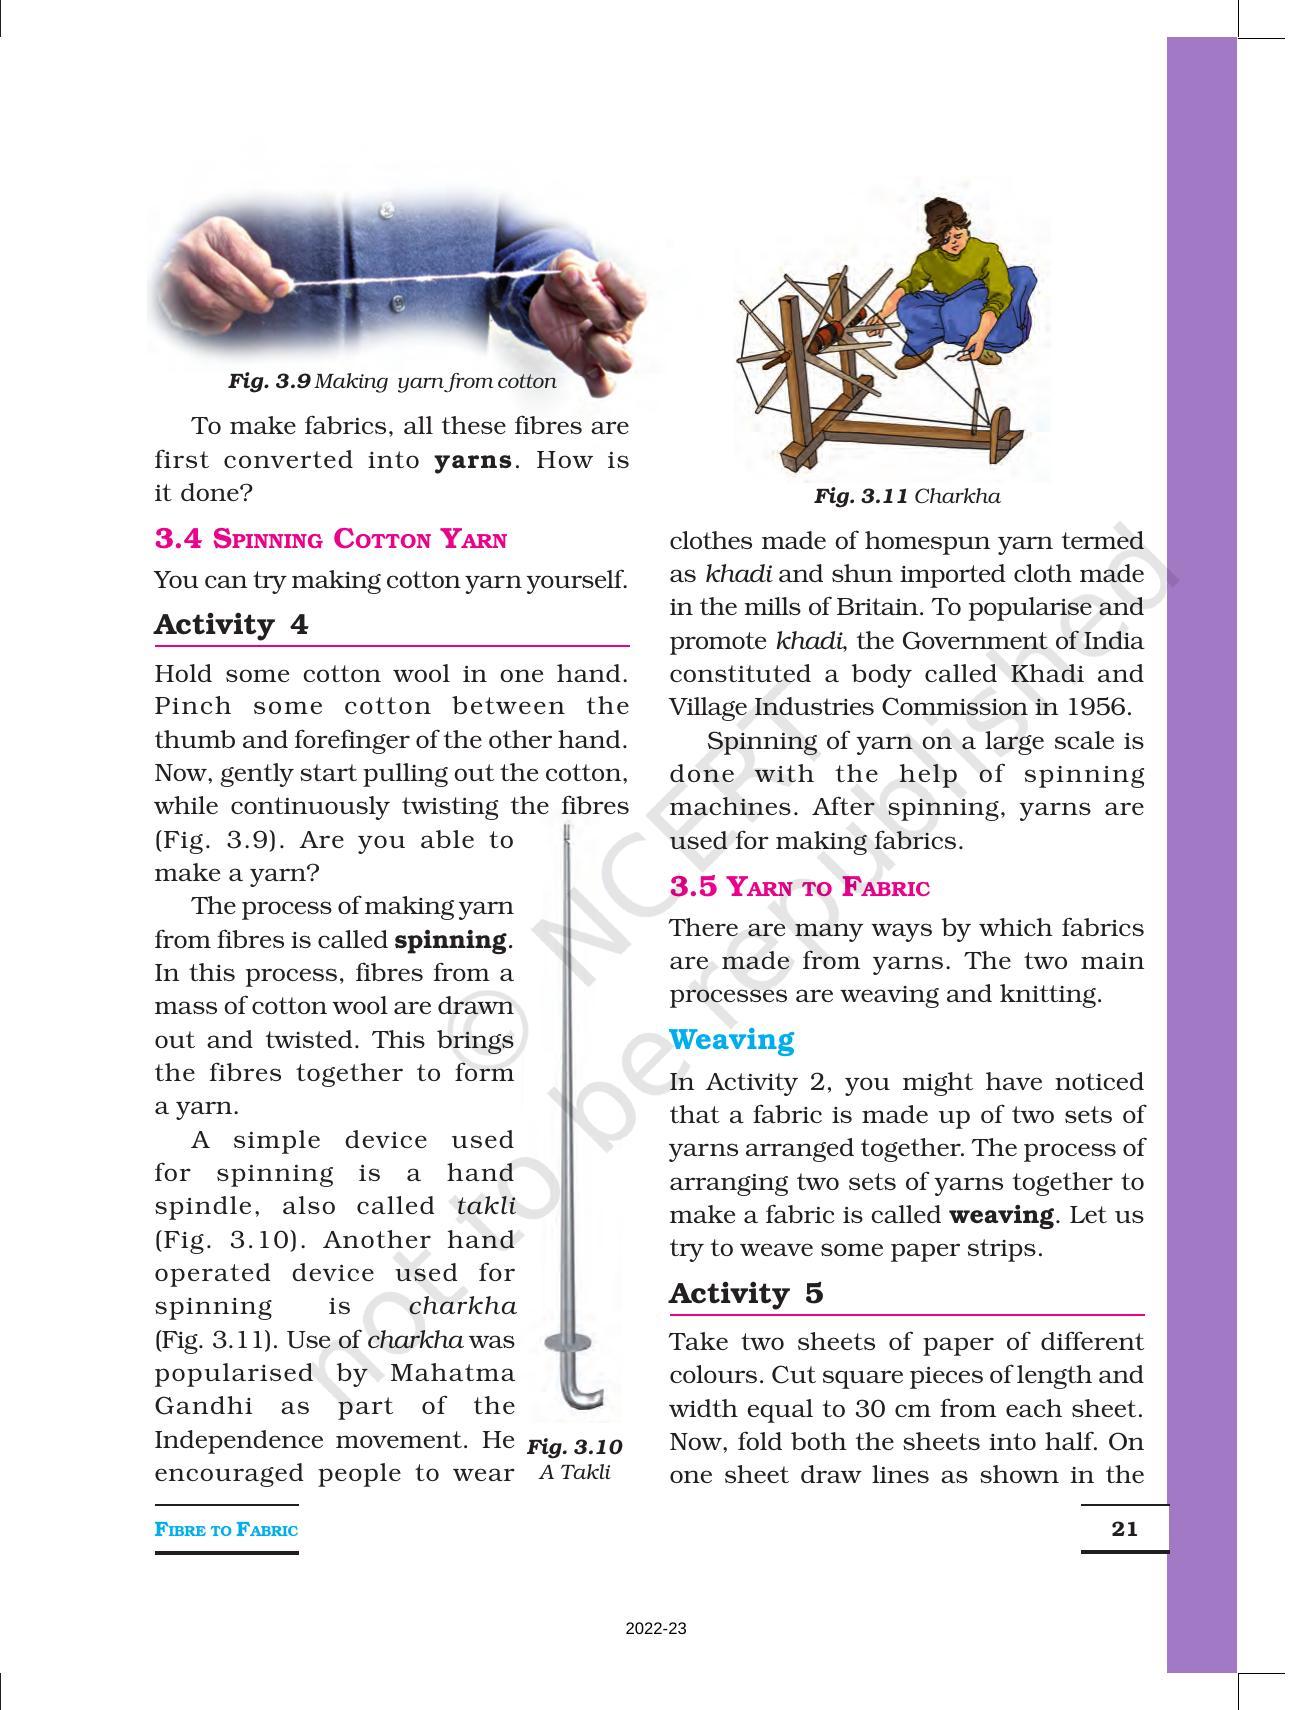 NCERT Book for Class 6 Science: Chapter 3-Fibre to Fabric - Page 4